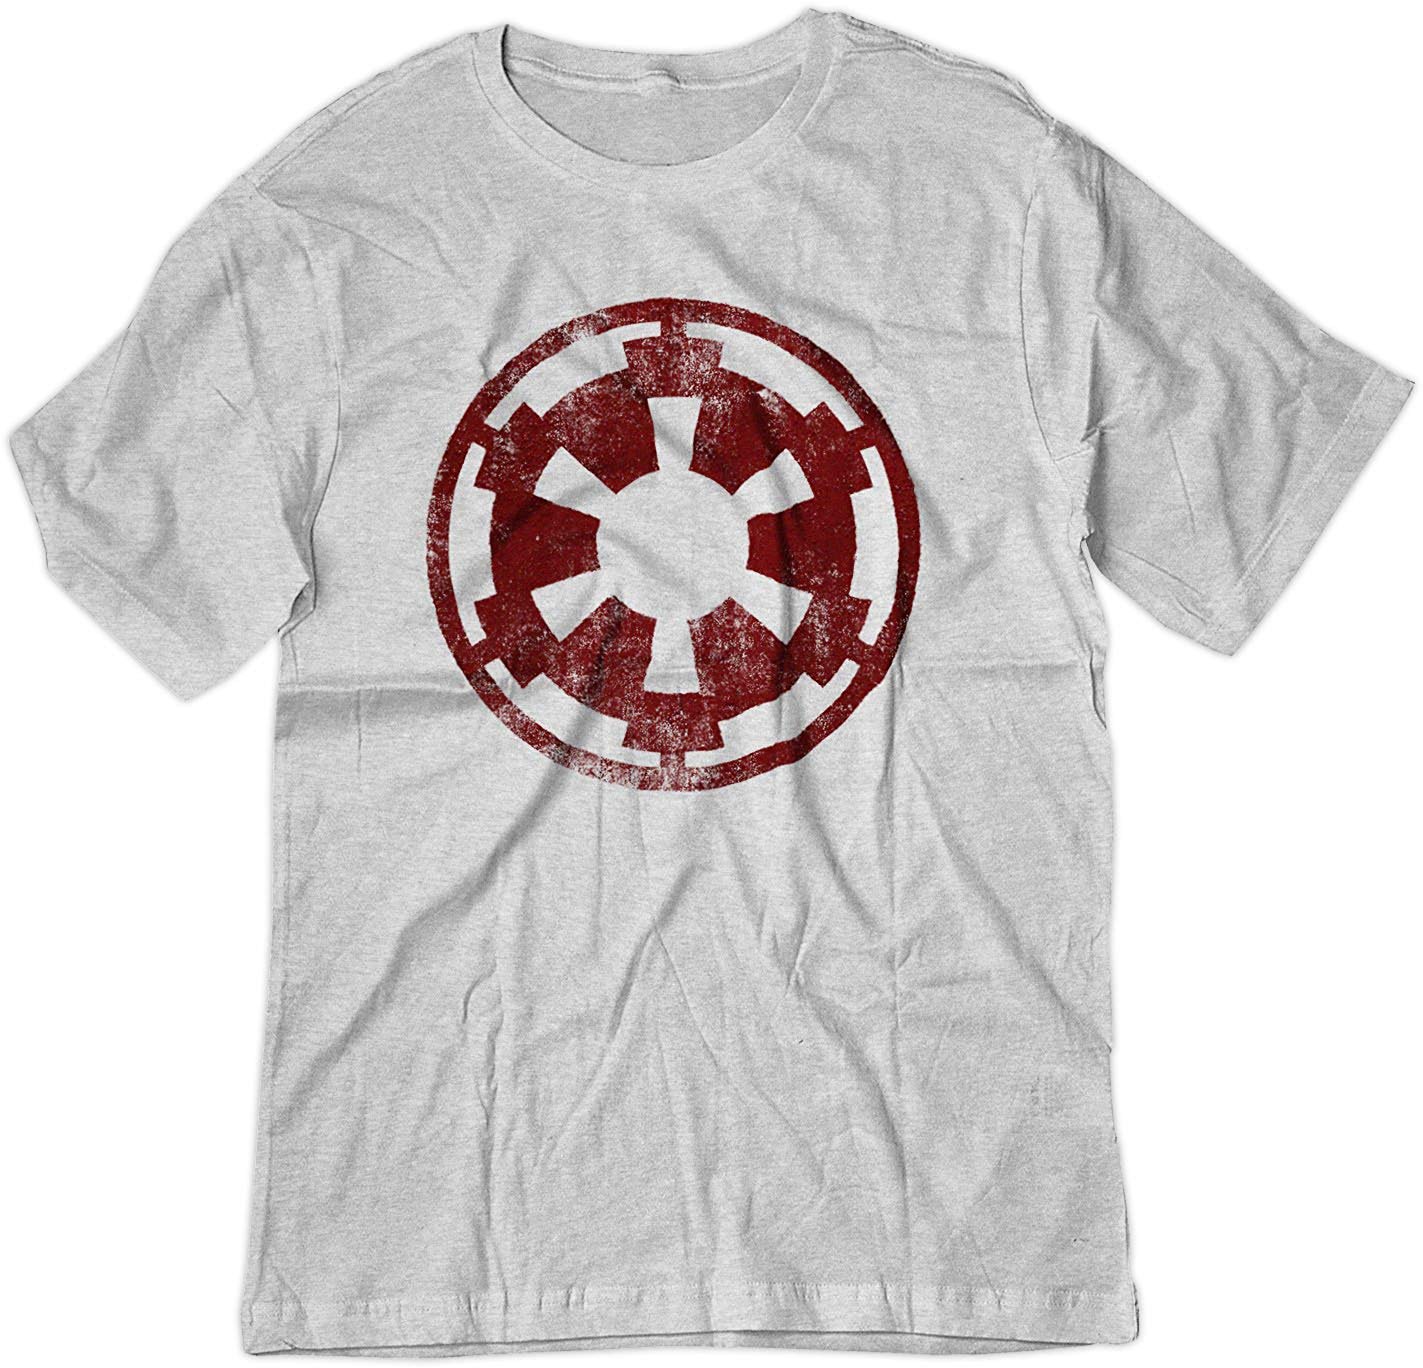 Imperial Clothing Logo - Amazon.com: BSW Men's Star Wars Imperial Crest Empire Logo Sith Lord ...